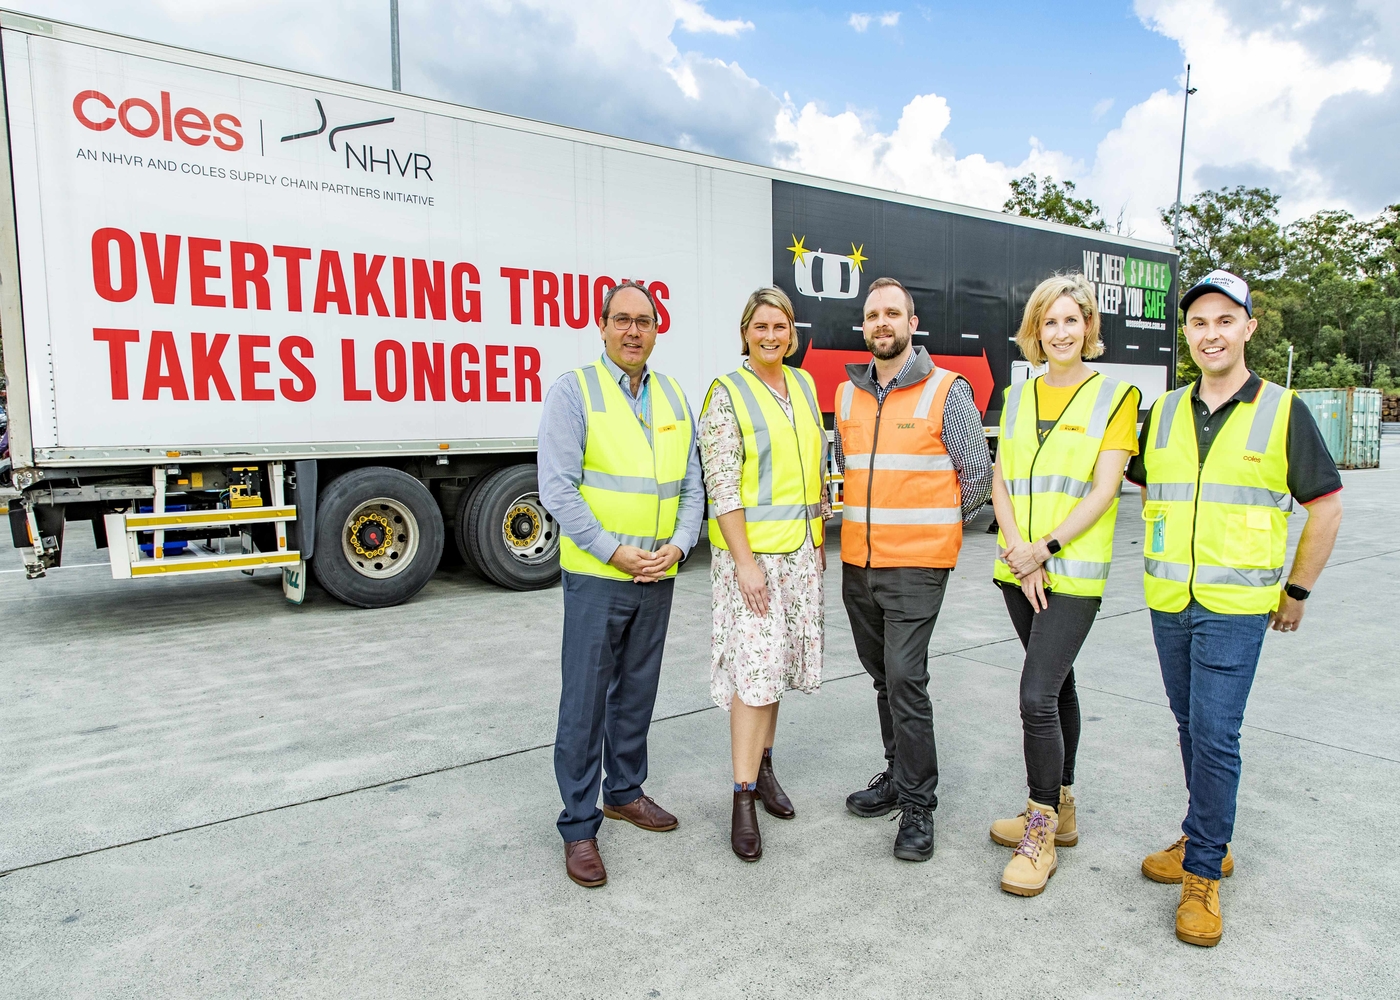 #007 (L-R) Sal Petroccitto – CEO, NHVR, Leisel Jones - Australian former competition swimmer and Olympic gold medallist, Mark Williamson, Toll State Manager for Coles qld, Naomi Frauenfelder, CEO, HHTS, David Clark, Head of Transport Safety & Sustainability - Supply Chain • GM LOGISTICS